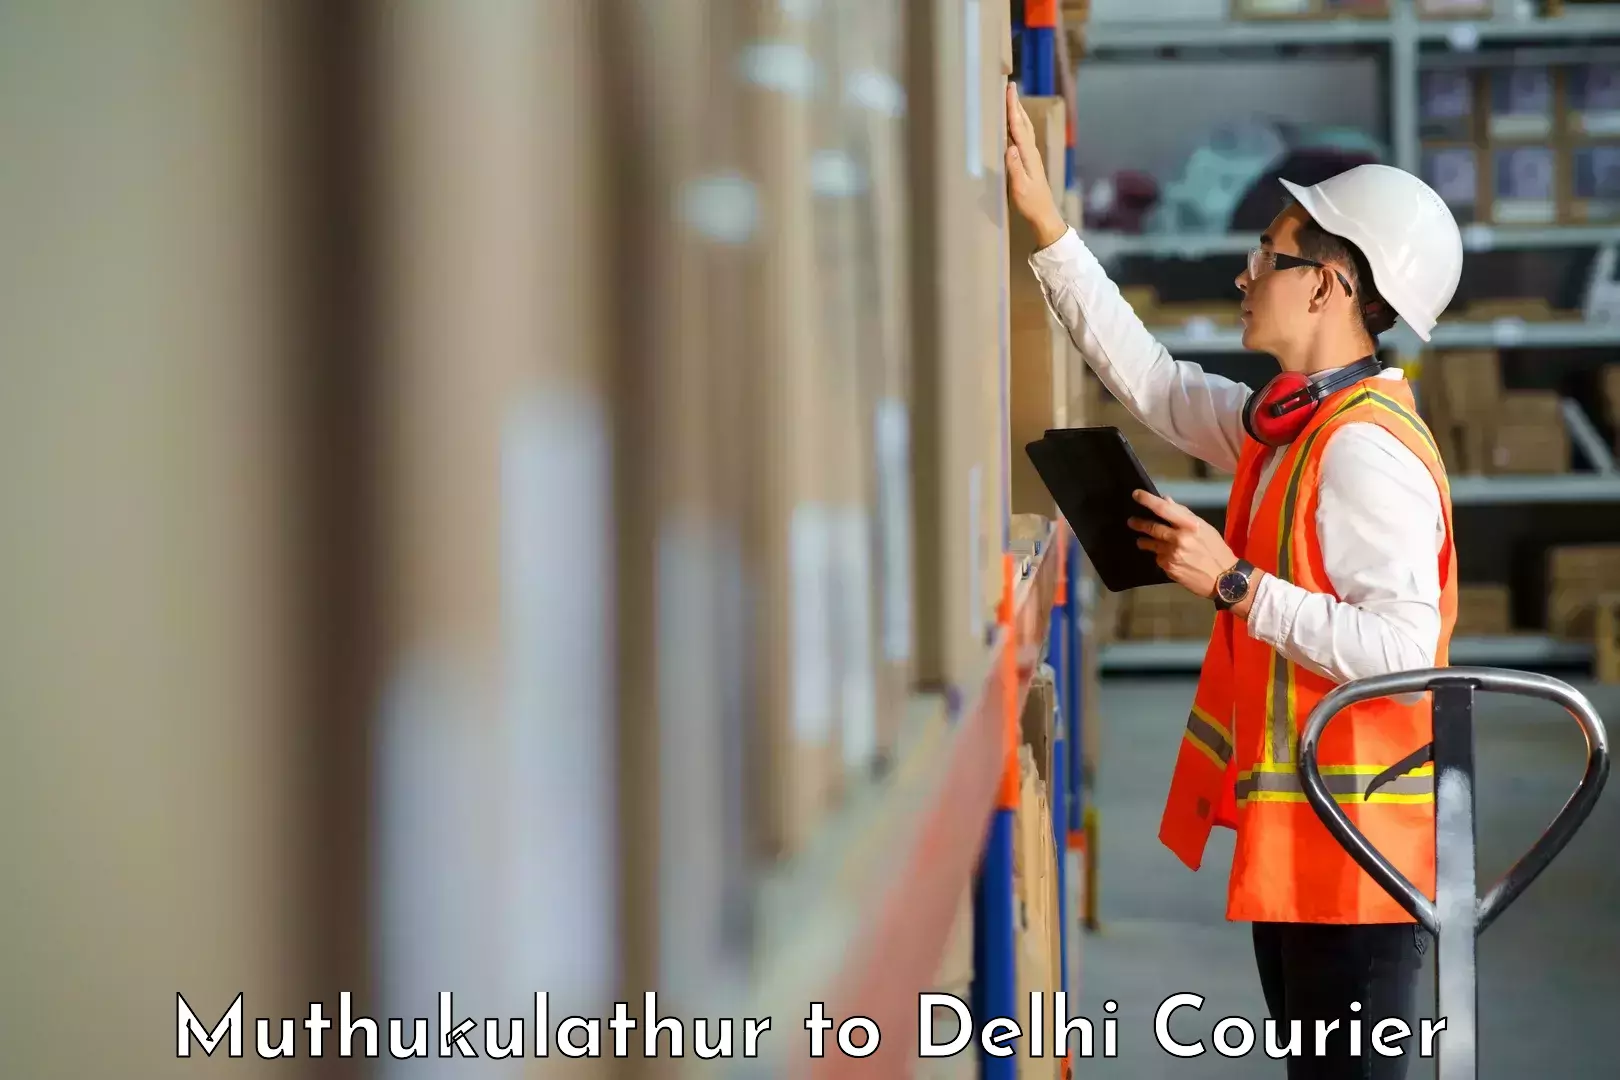 Streamlined shipping process in Muthukulathur to University of Delhi